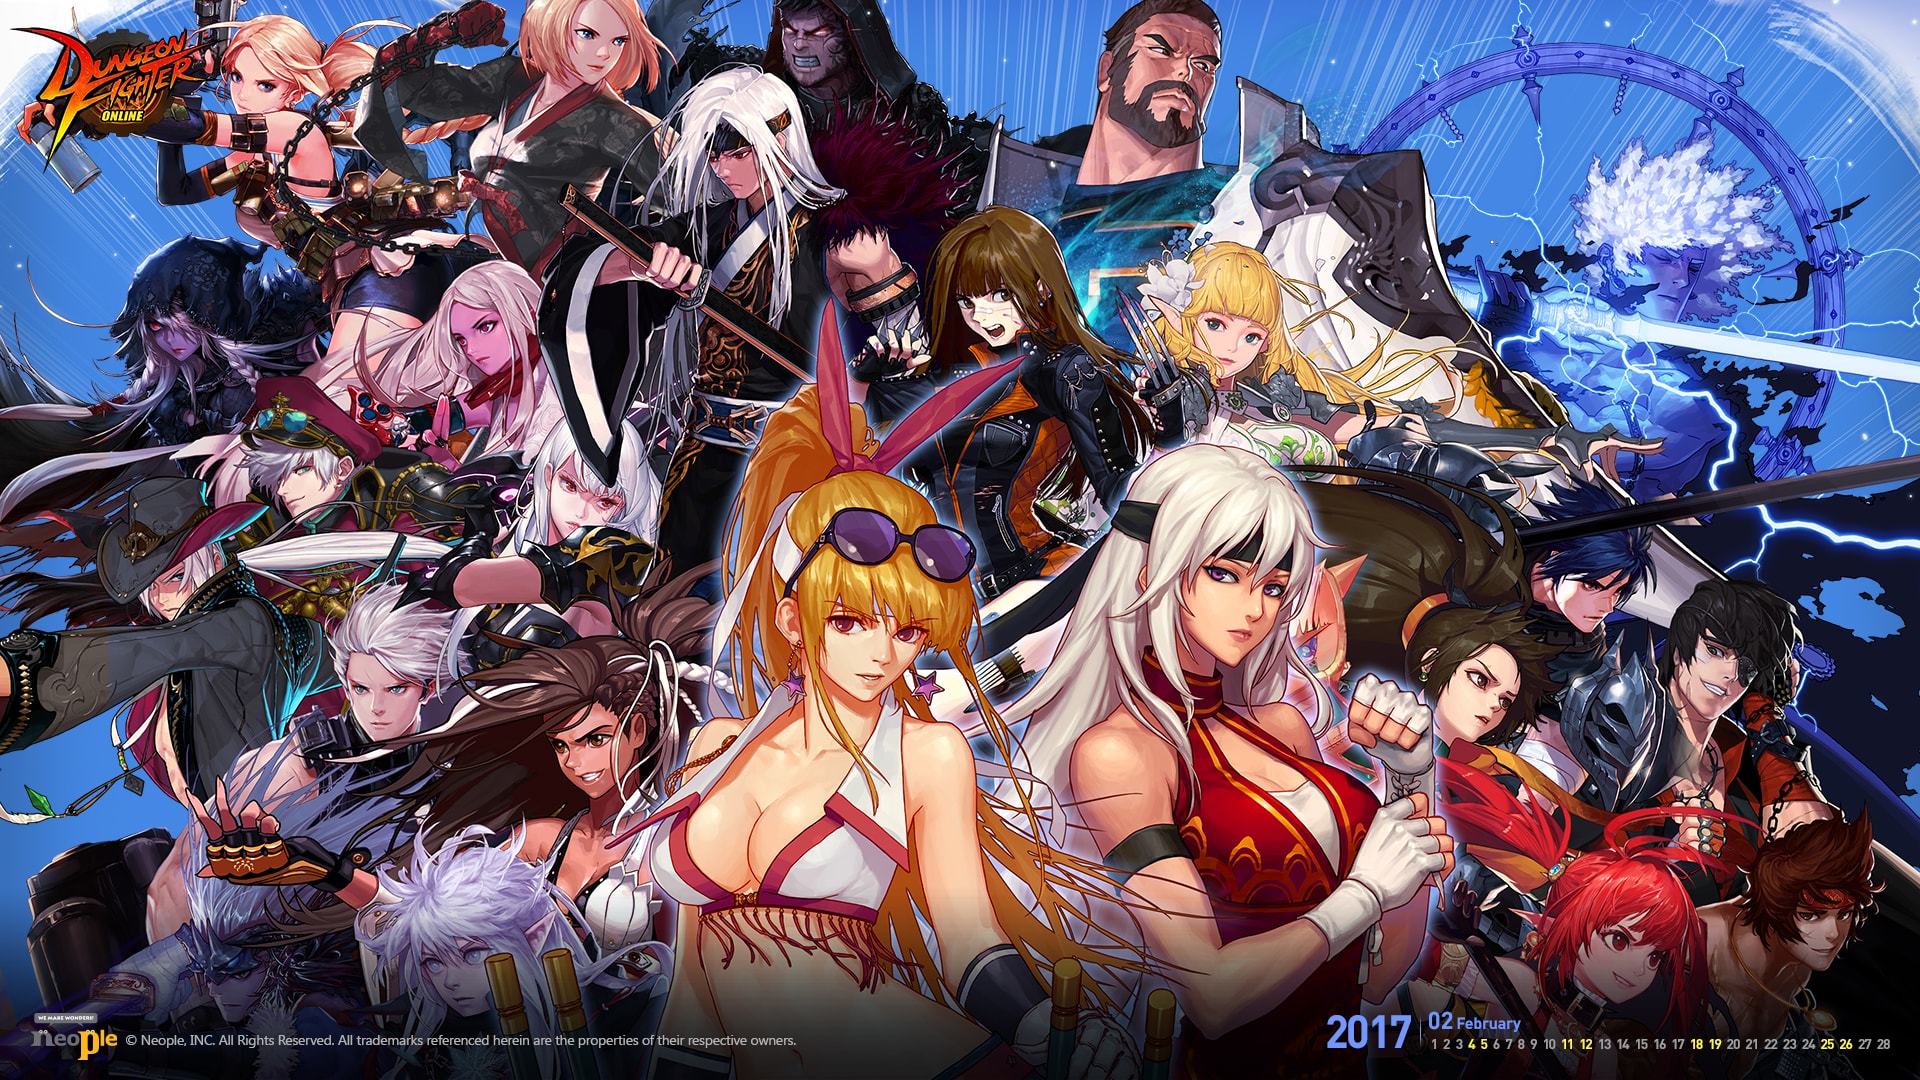 Dungeon Fighter Online A Look At The Game In